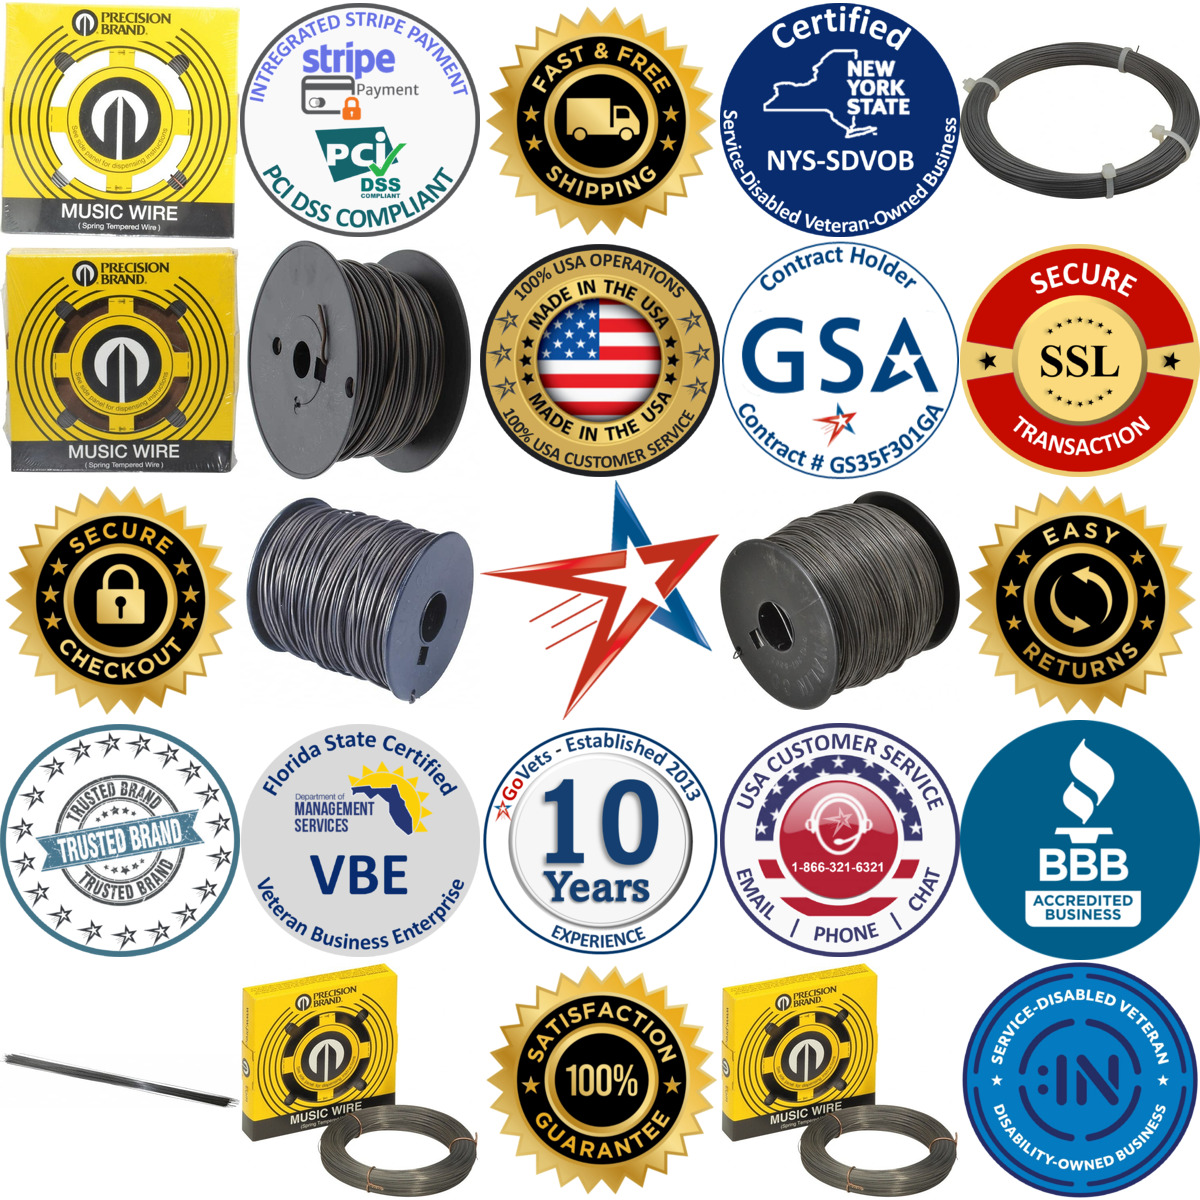 A selection of Steel Wire products on GoVets